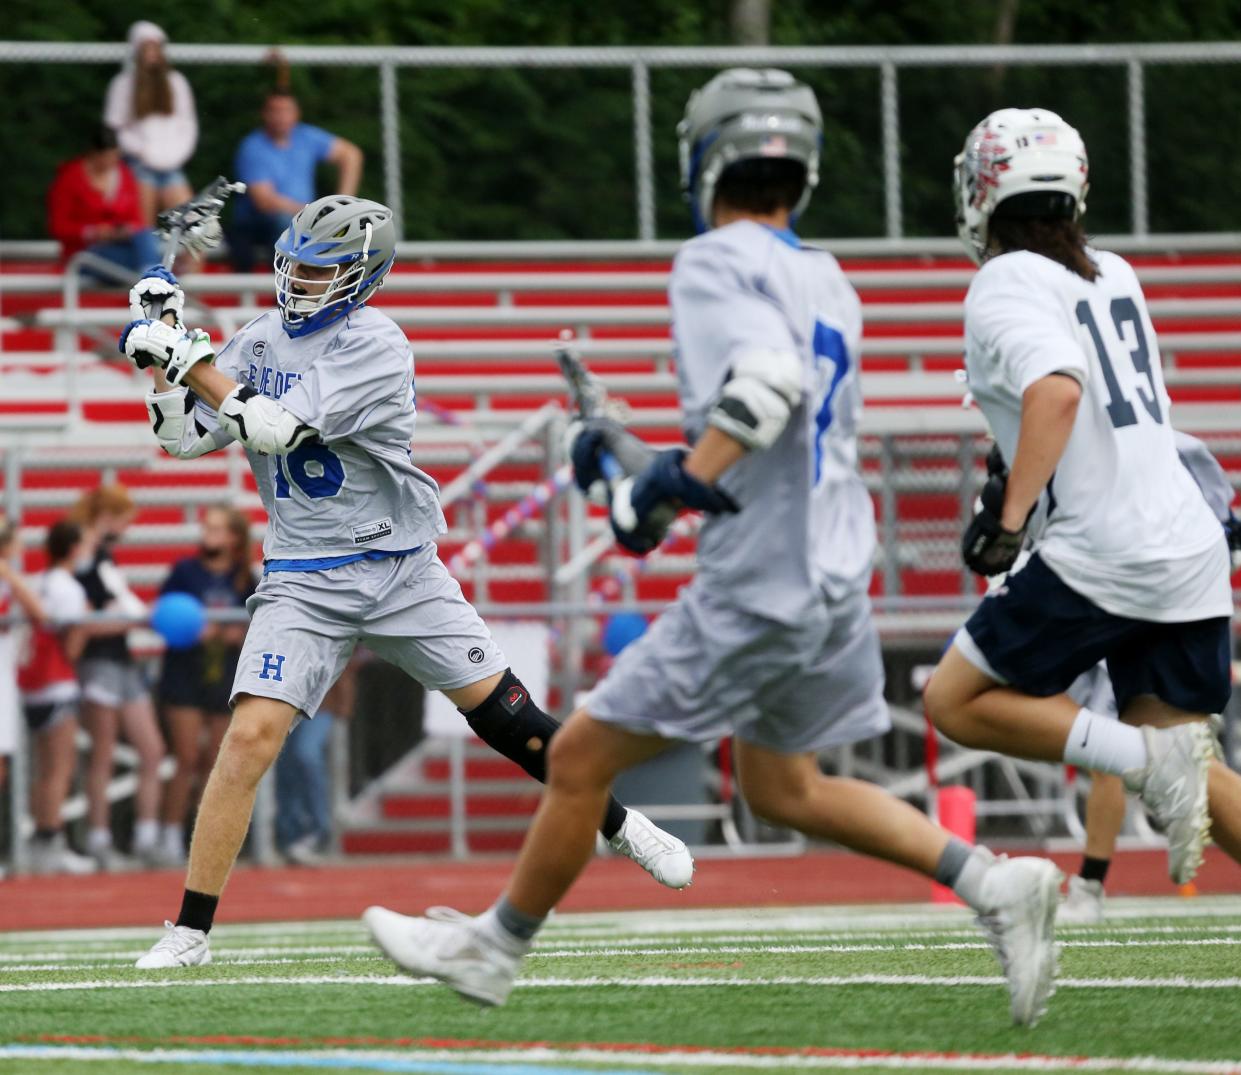 Haldane's Evan Giachinta readies to take a shot against Wappingers during a June 2, 2021 boys lacrosse game.